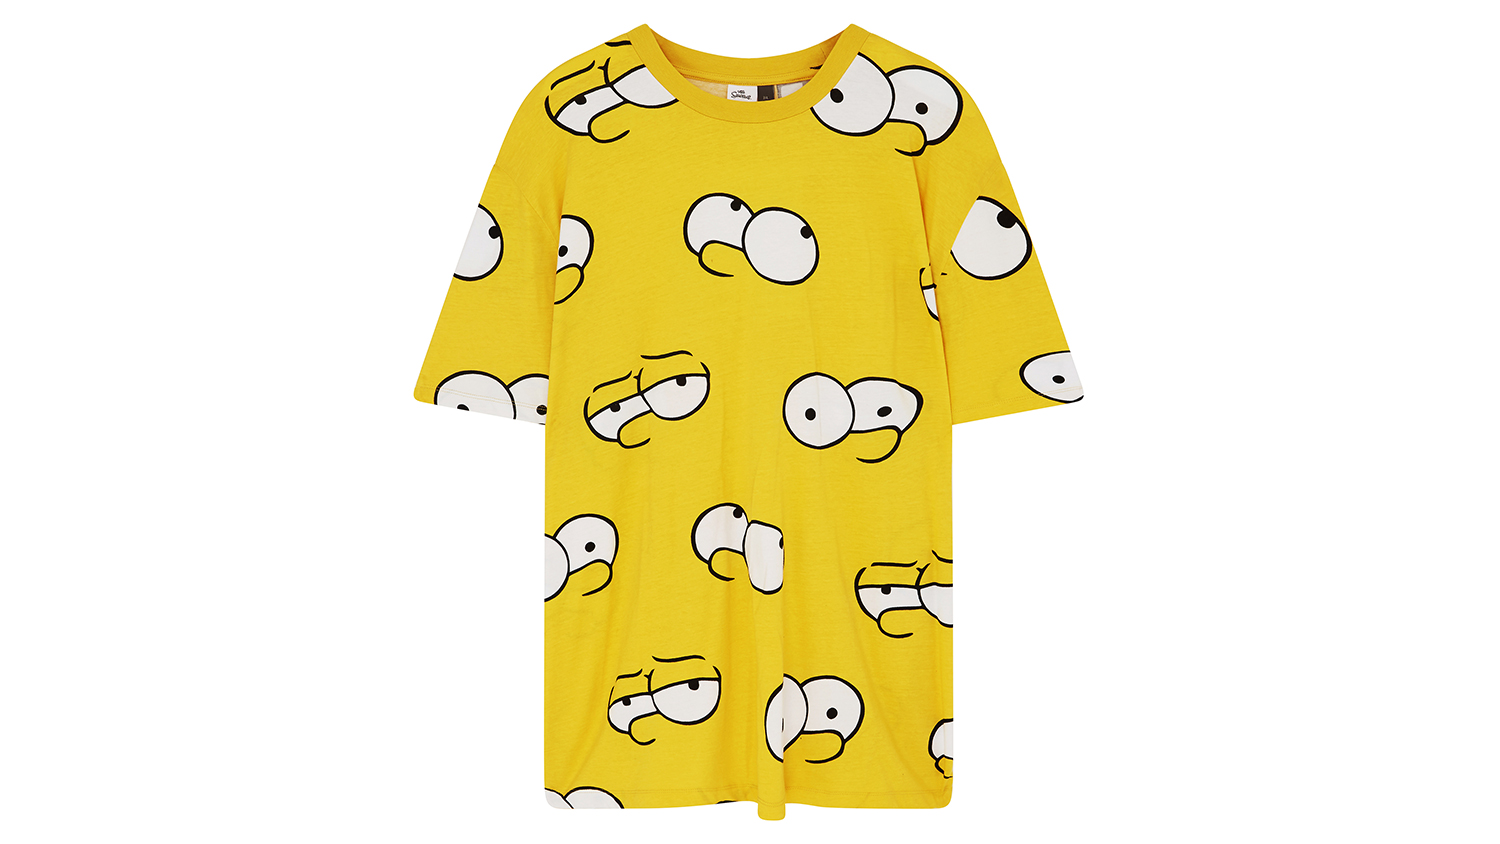 asos x the simpsons collection barteyestee